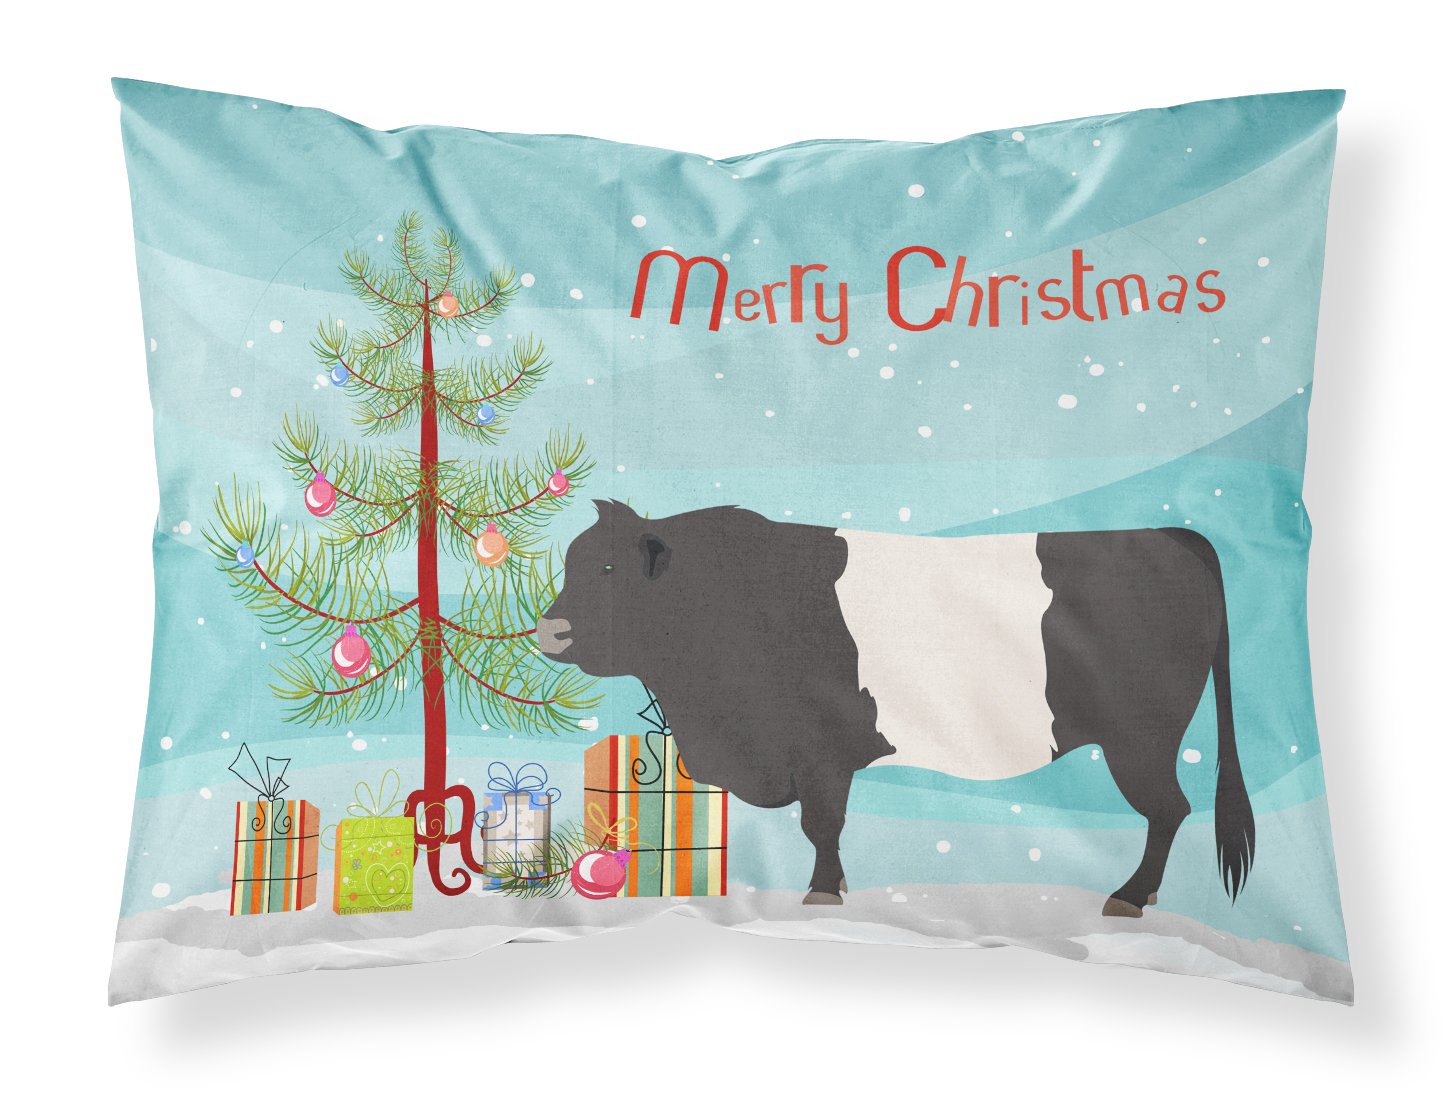 Belted Galloway Cow Christmas Fabric Standard Pillowcase BB9198PILLOWCASE by Caroline's Treasures